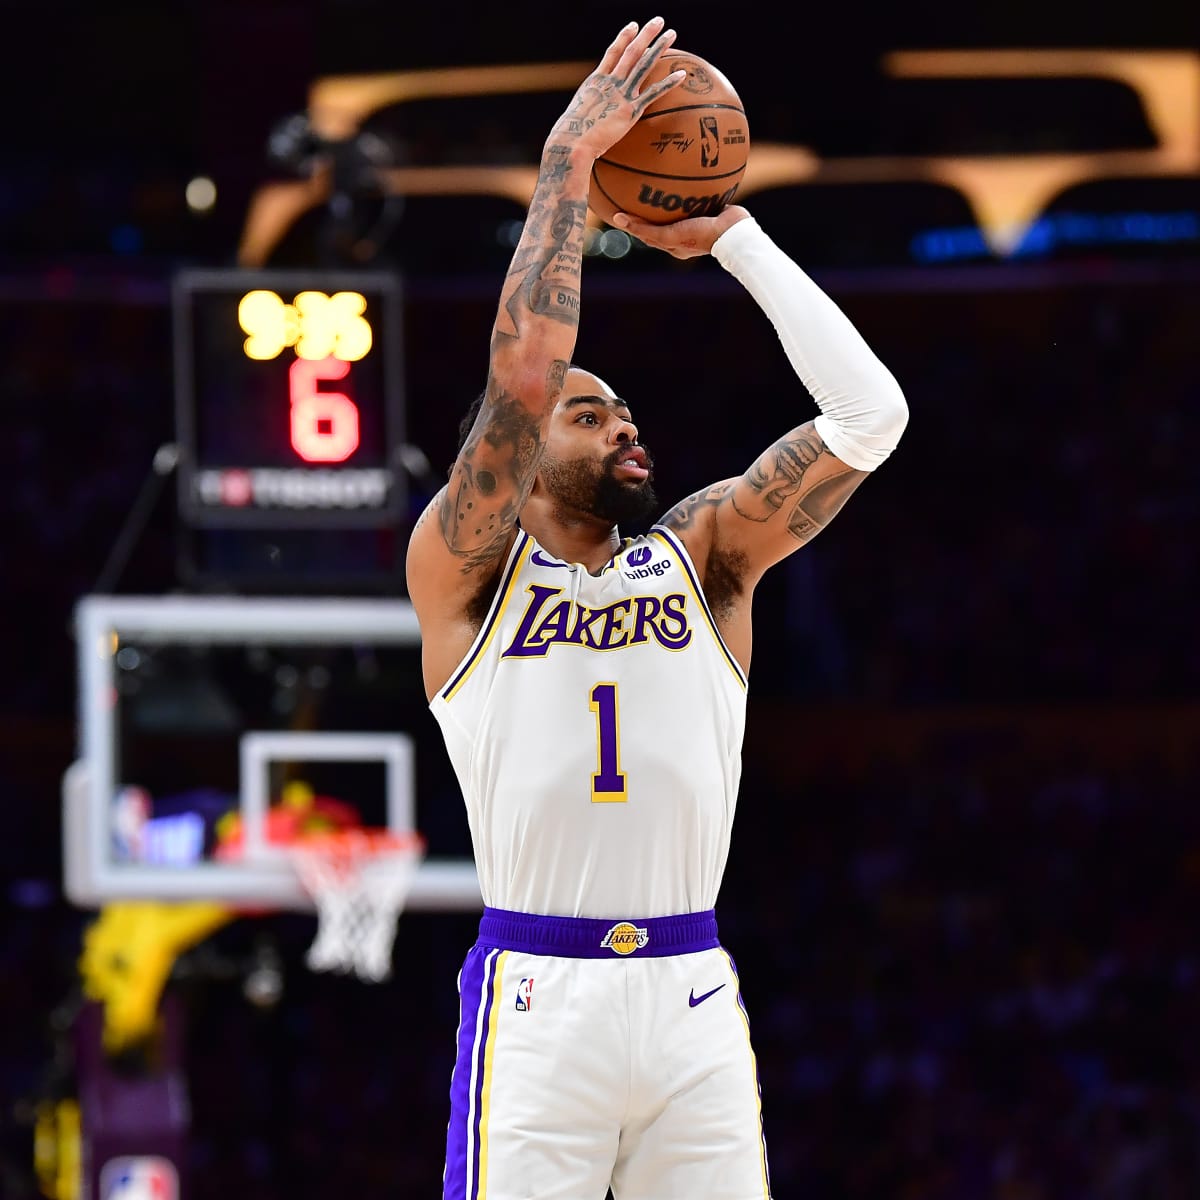 Lakers improved in NBA free agency, but they're still far from